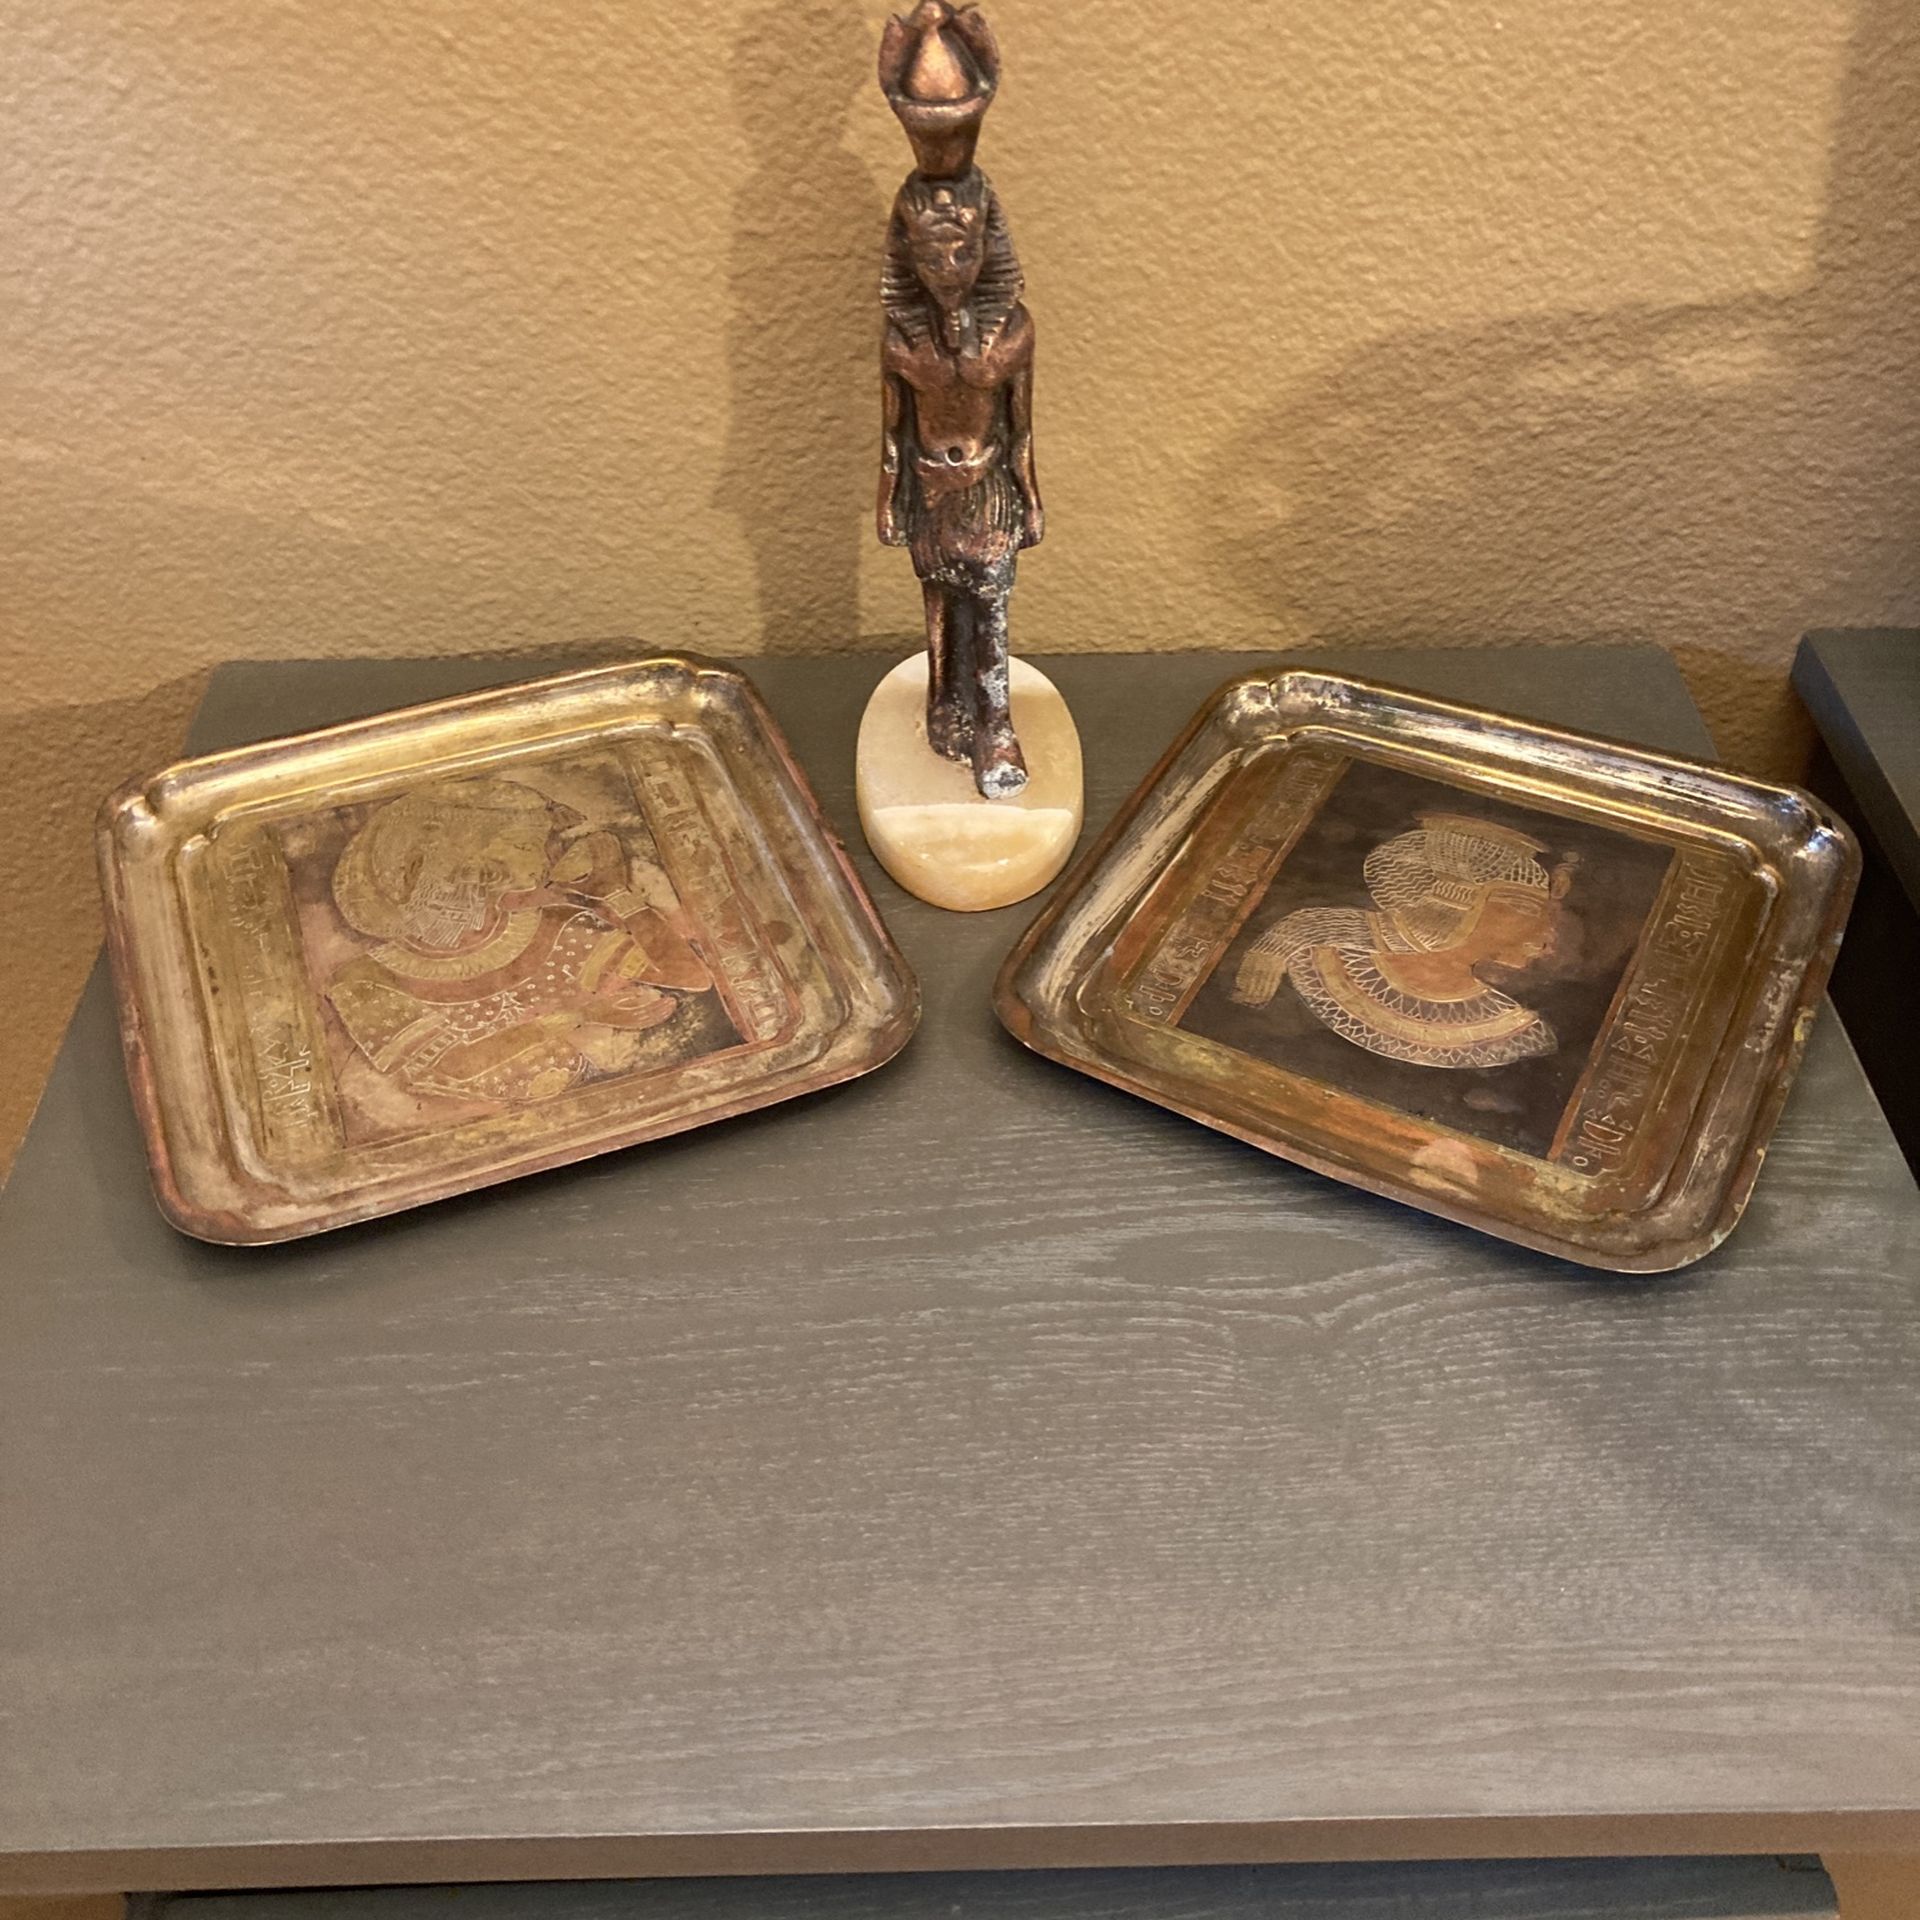 2art Deco Egyptian Revival Decor Trays And Bronze Statue With Marble Base